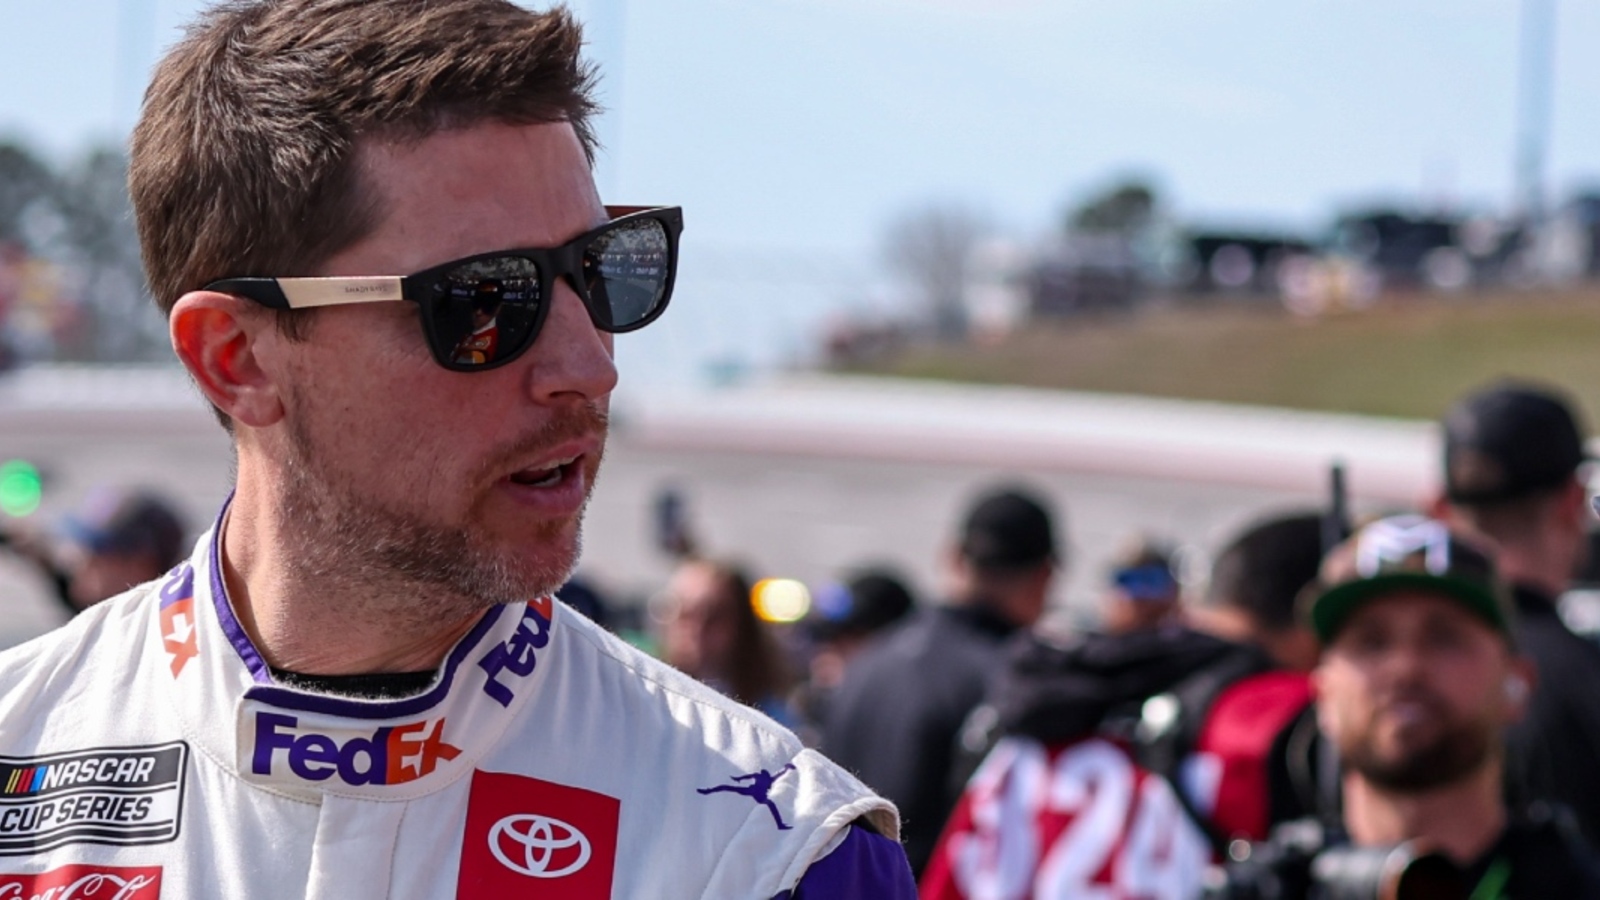 Denny Hamlin takes issue with 0.001 margin of victory for Kyle Larson over Chris Buescher: ‘It’s made up’